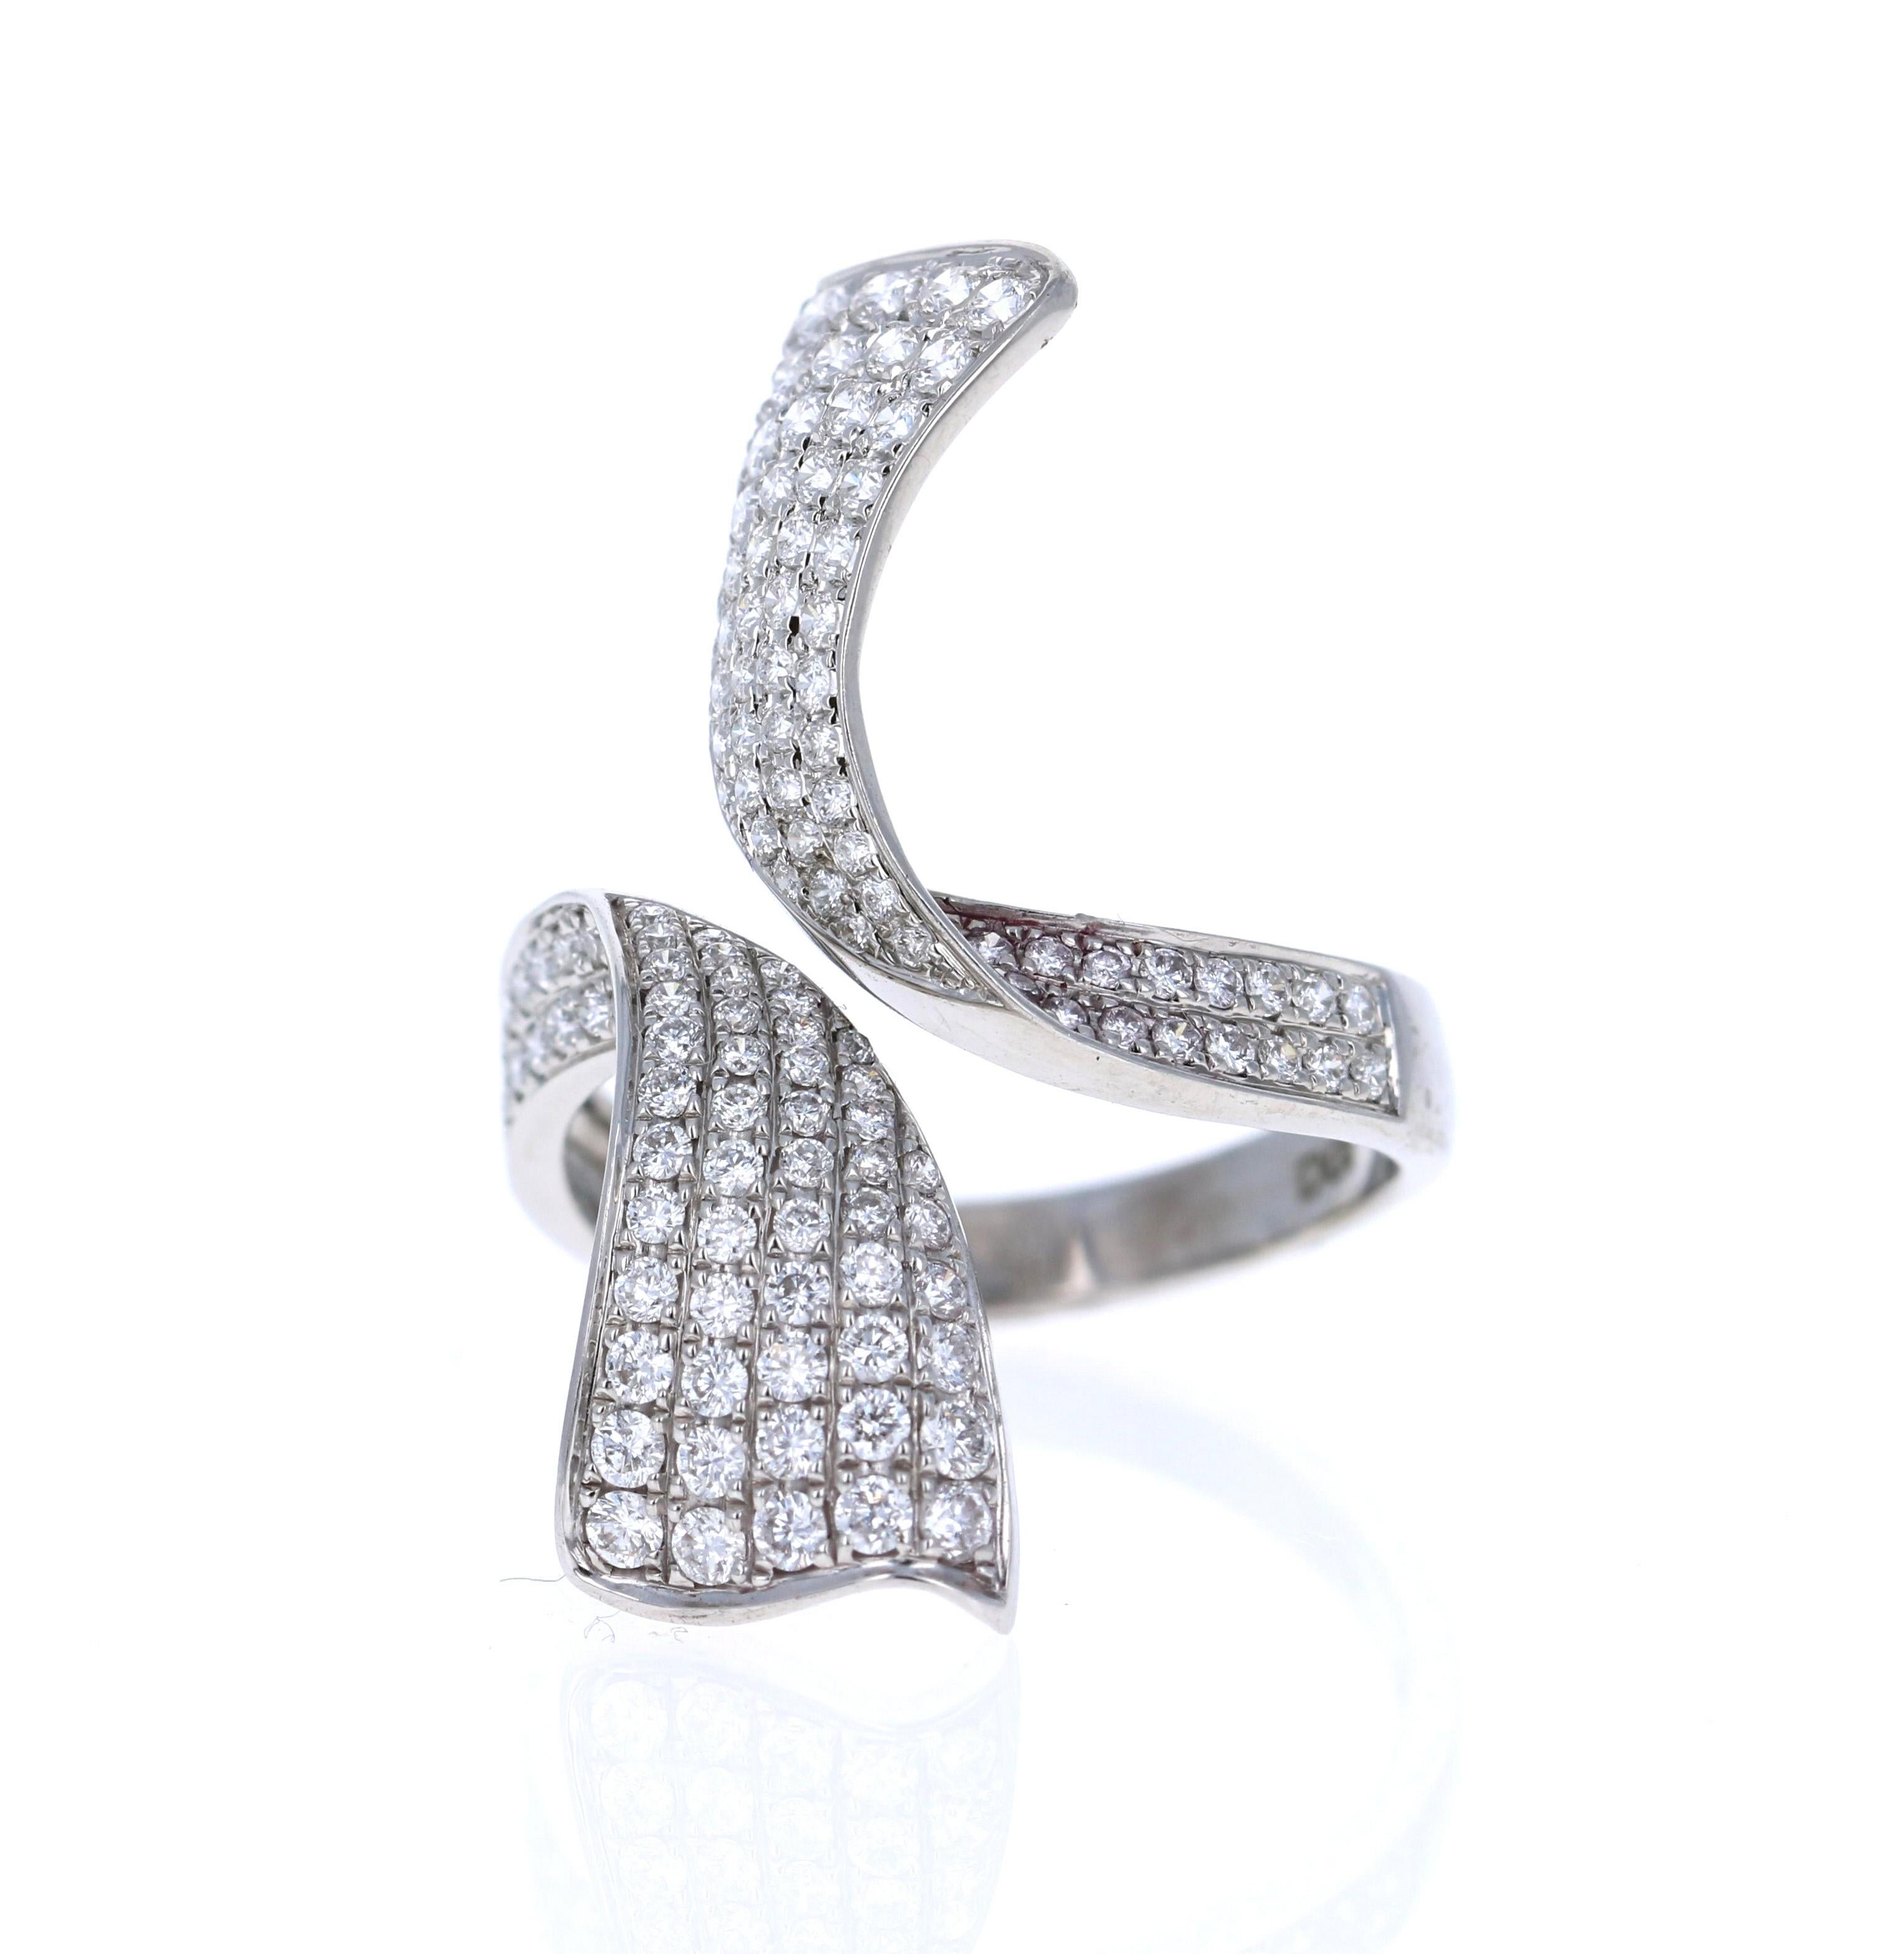 Contemporary 1.09 Carat Round Cut Diamond White Gold Cocktail Ring For Sale